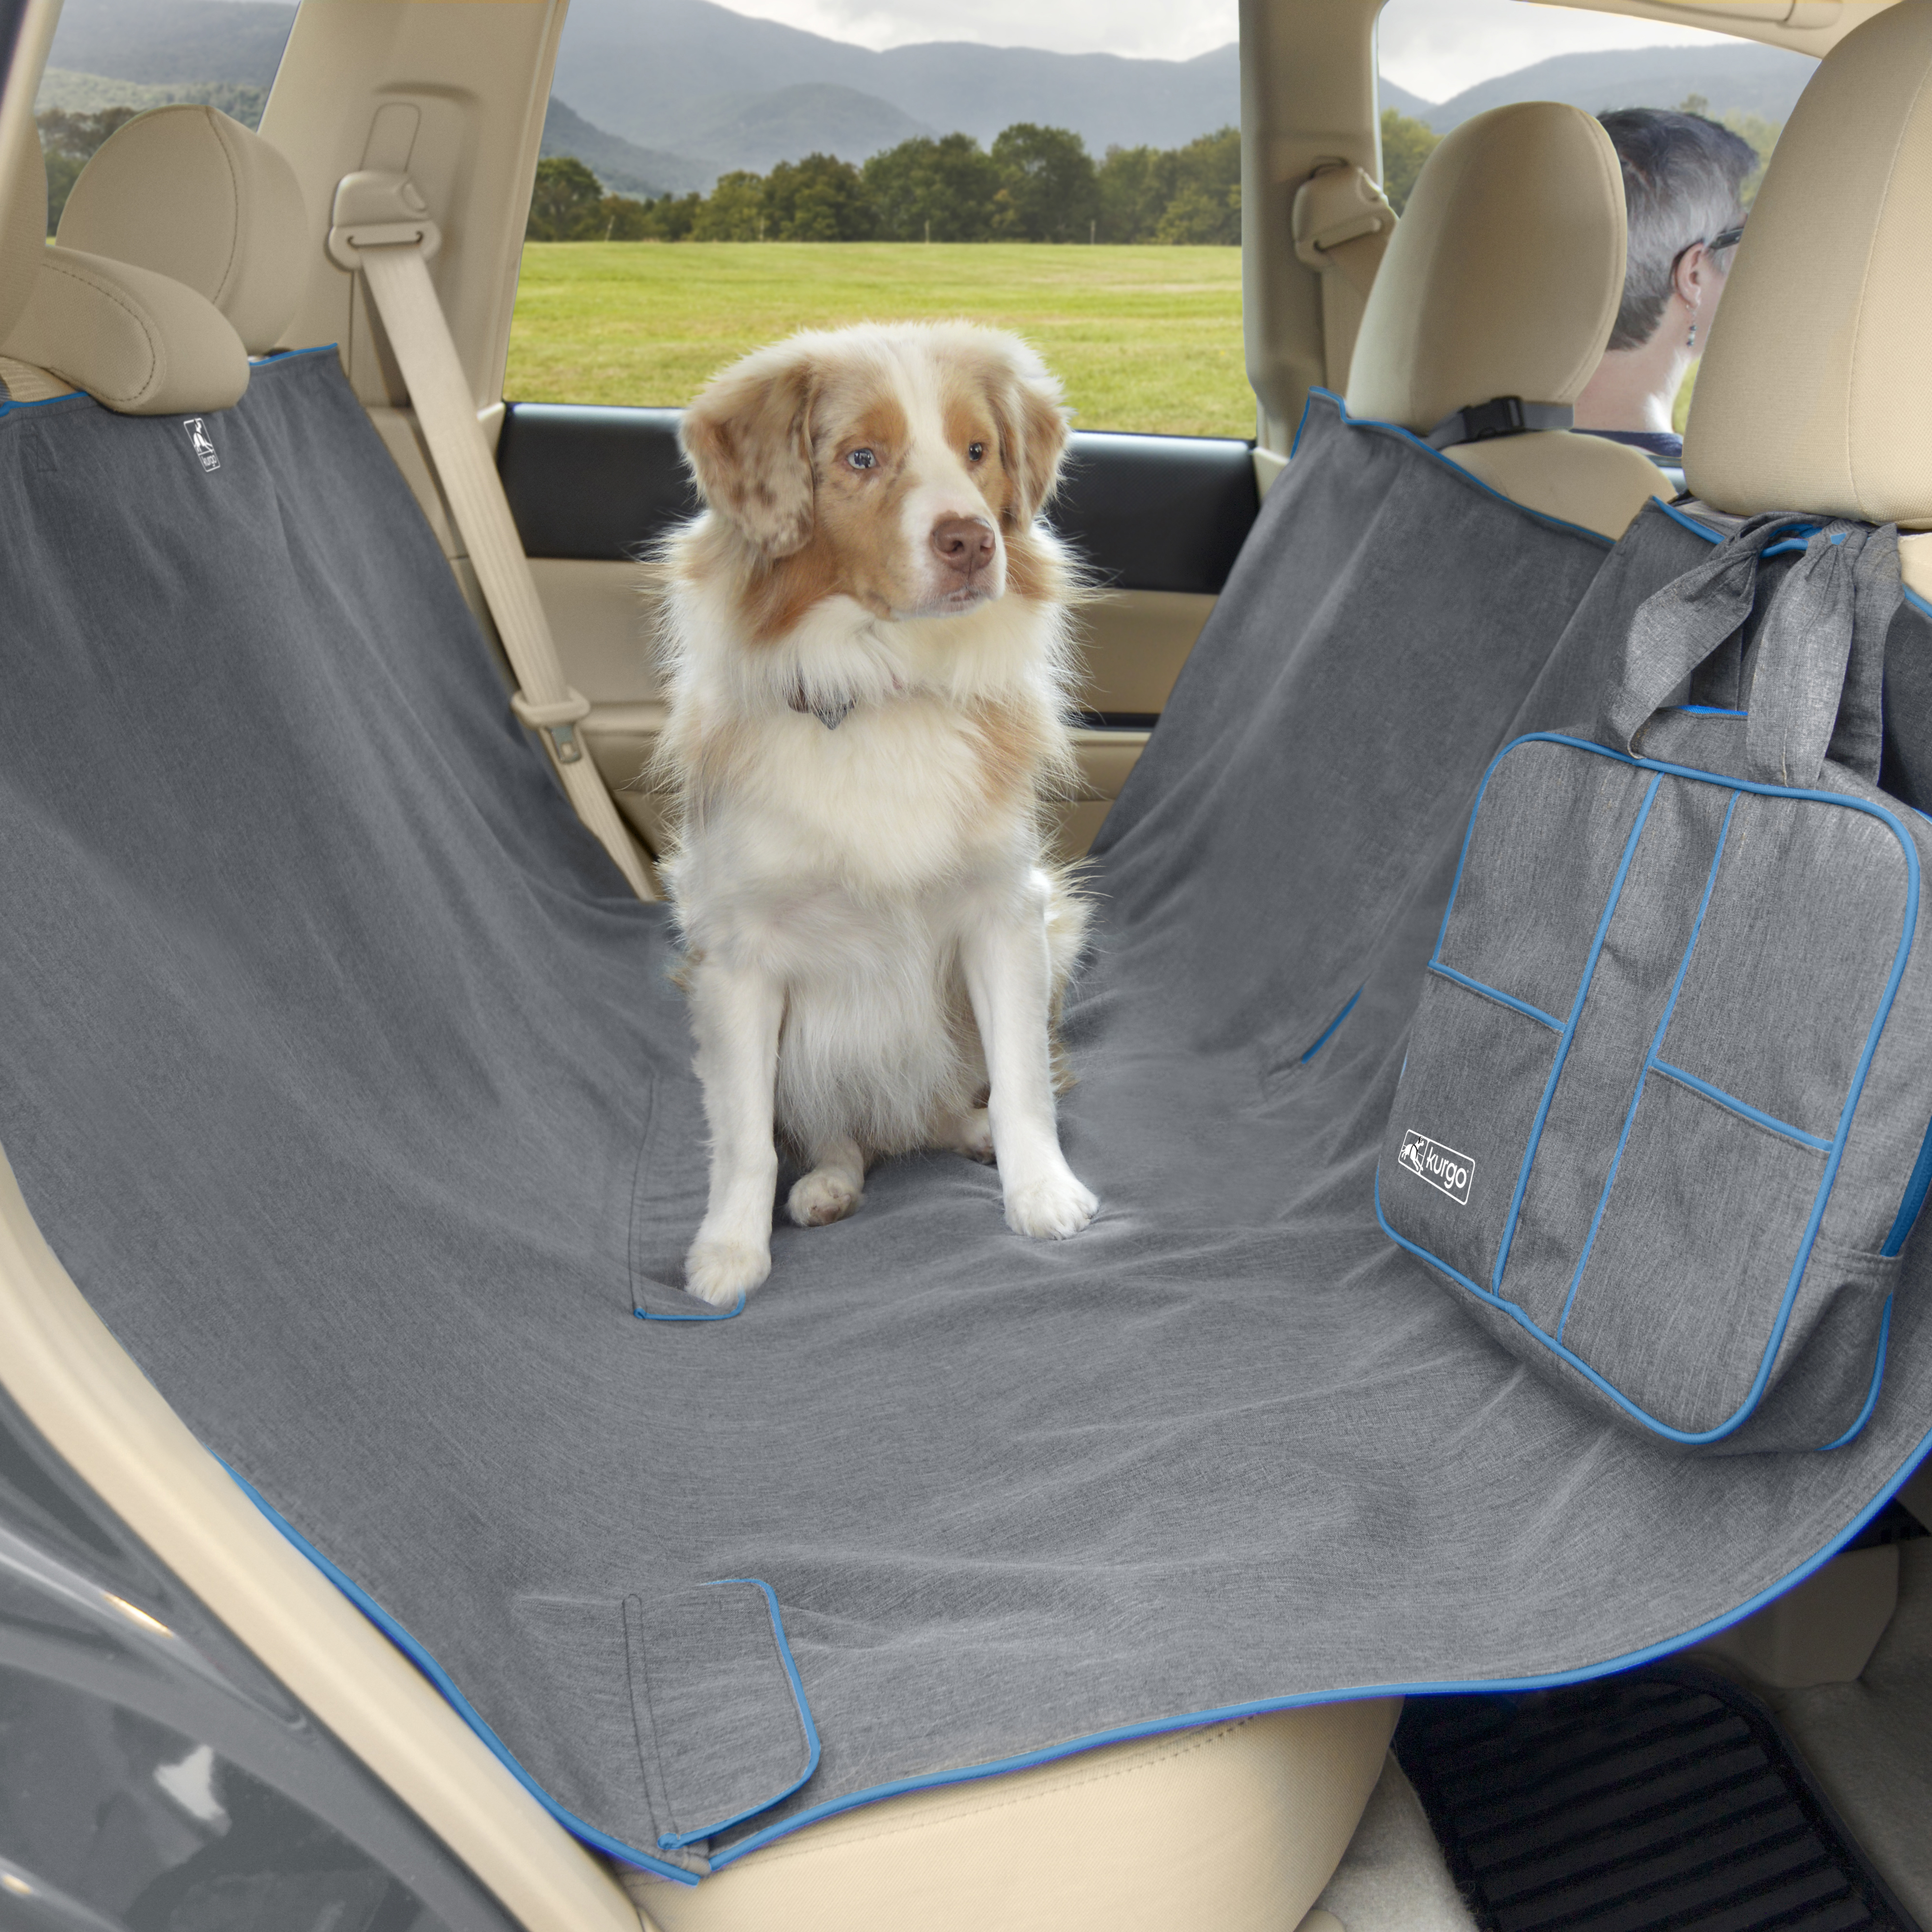 Pet Union Car Seat Cover/Hammock for Dogs, Black